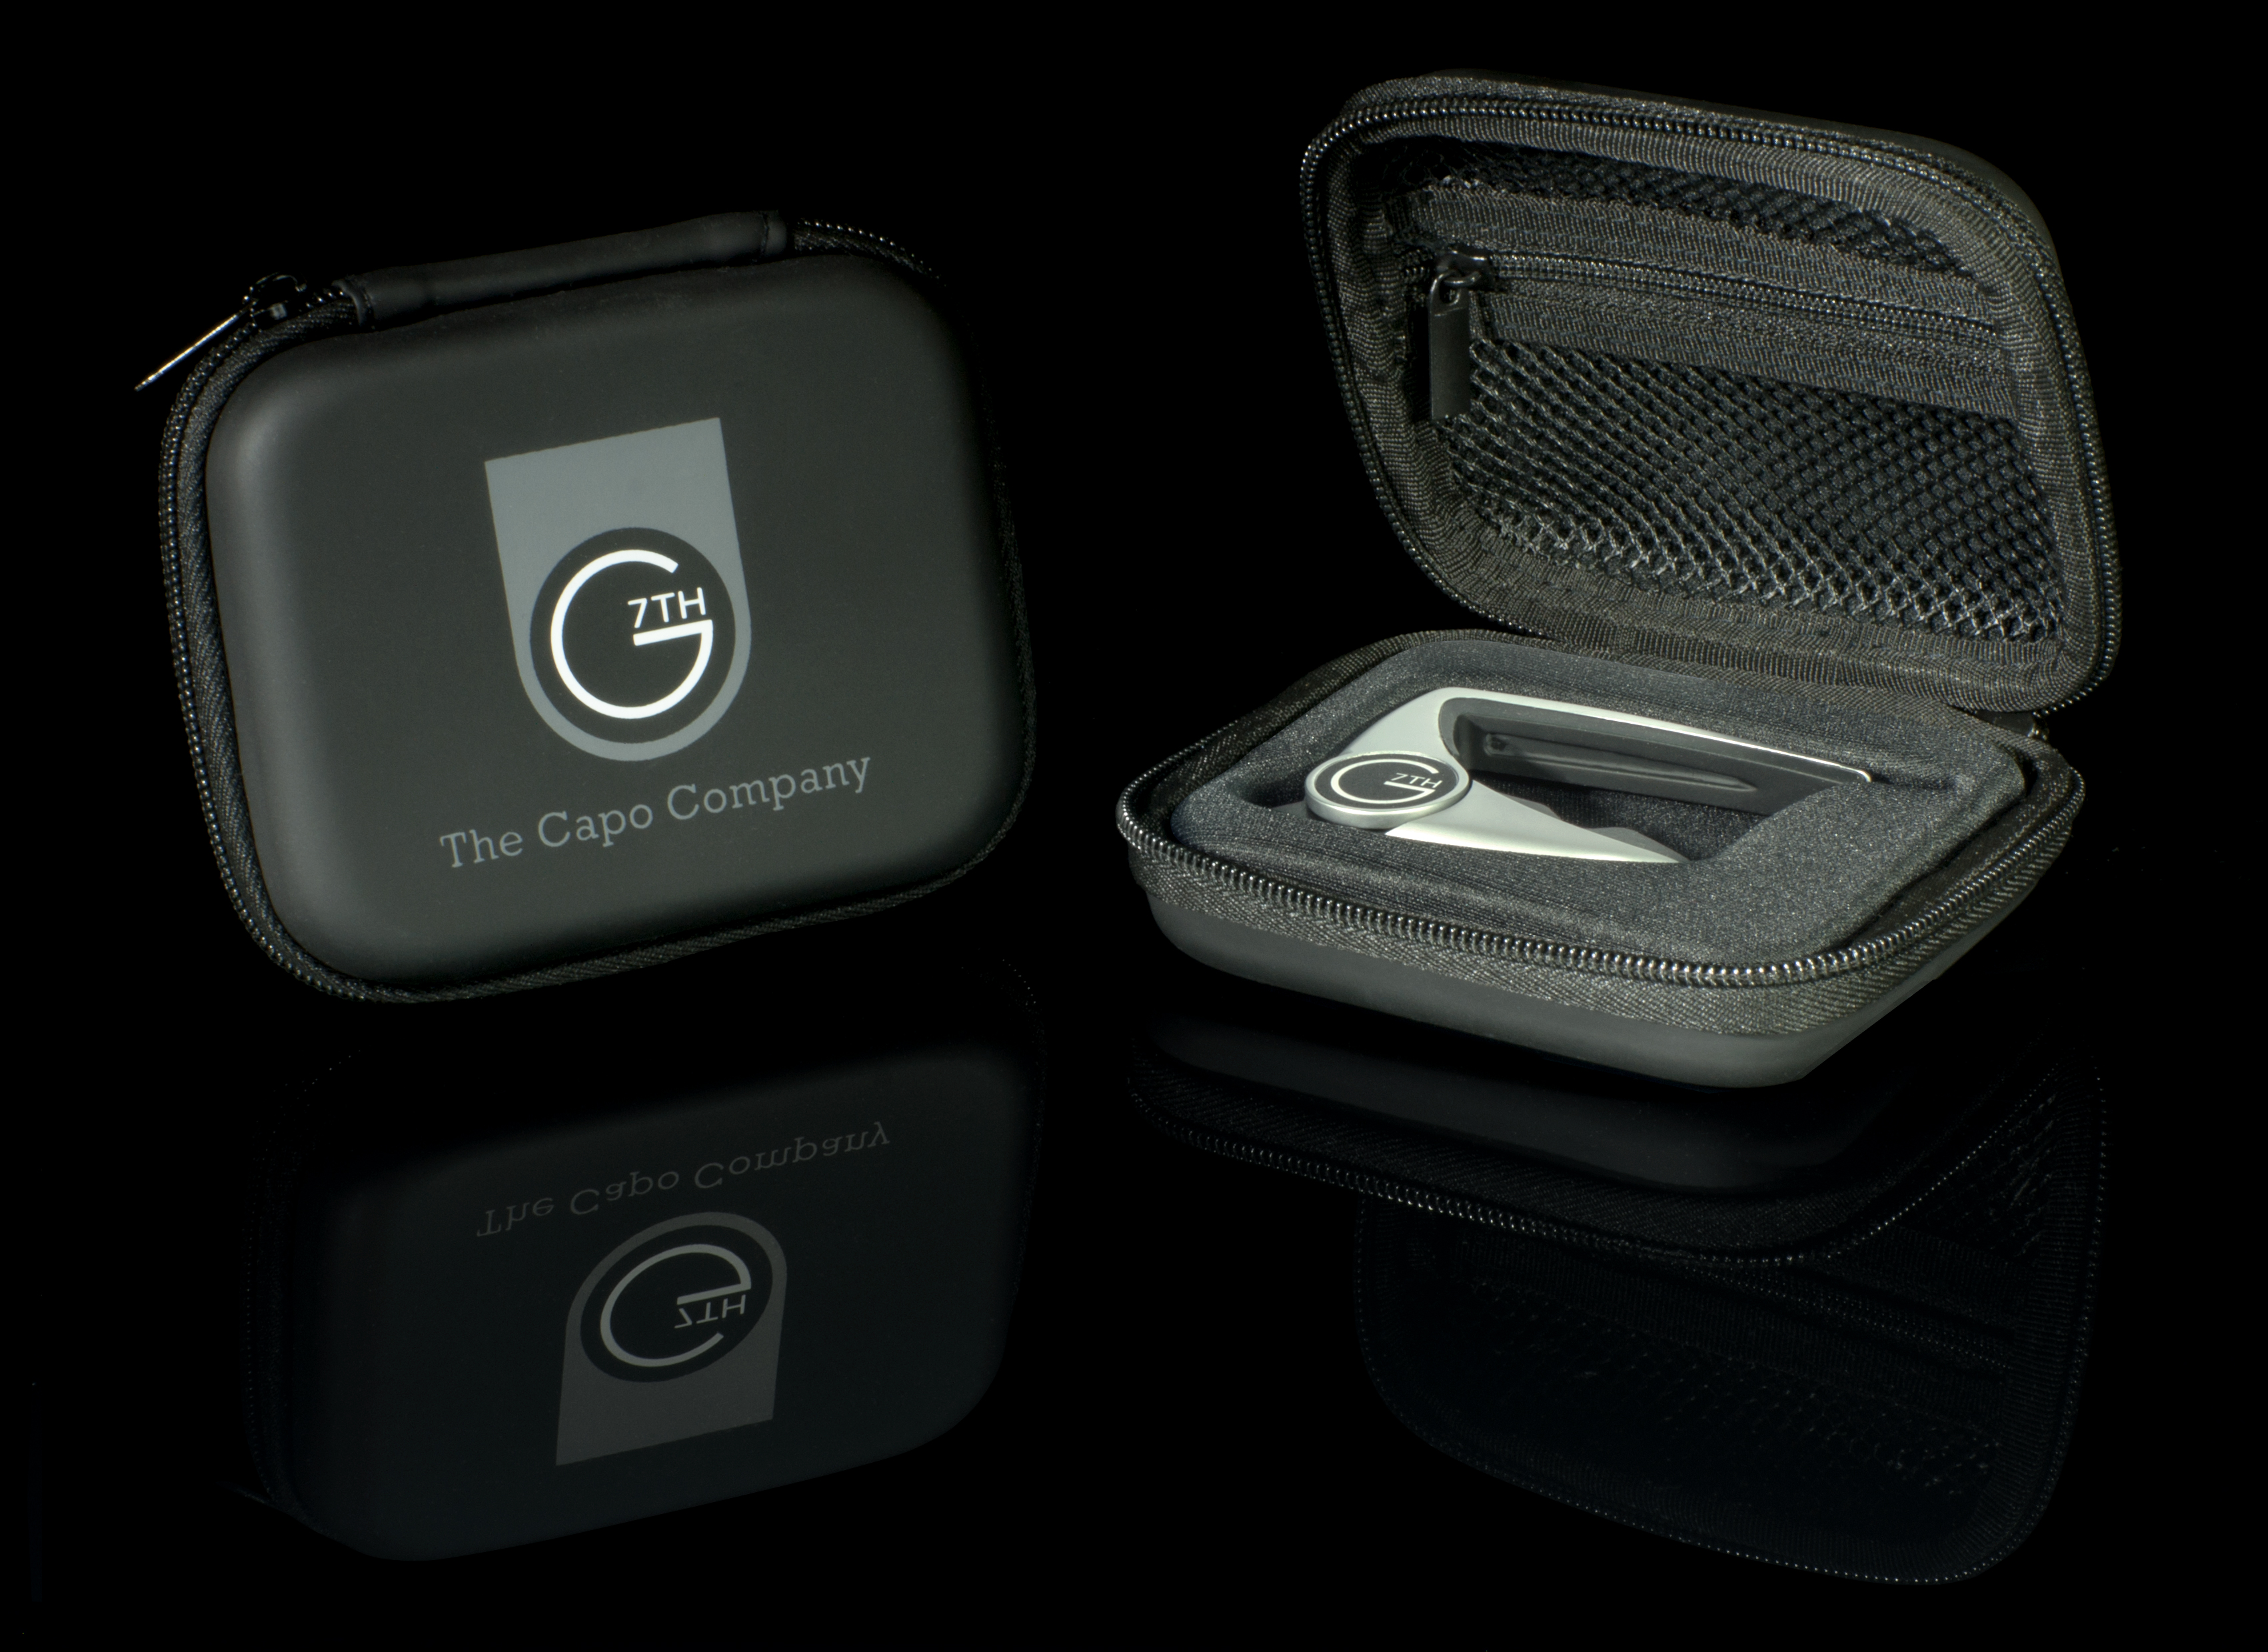 G7th Protector Cases with Performance 2 capo